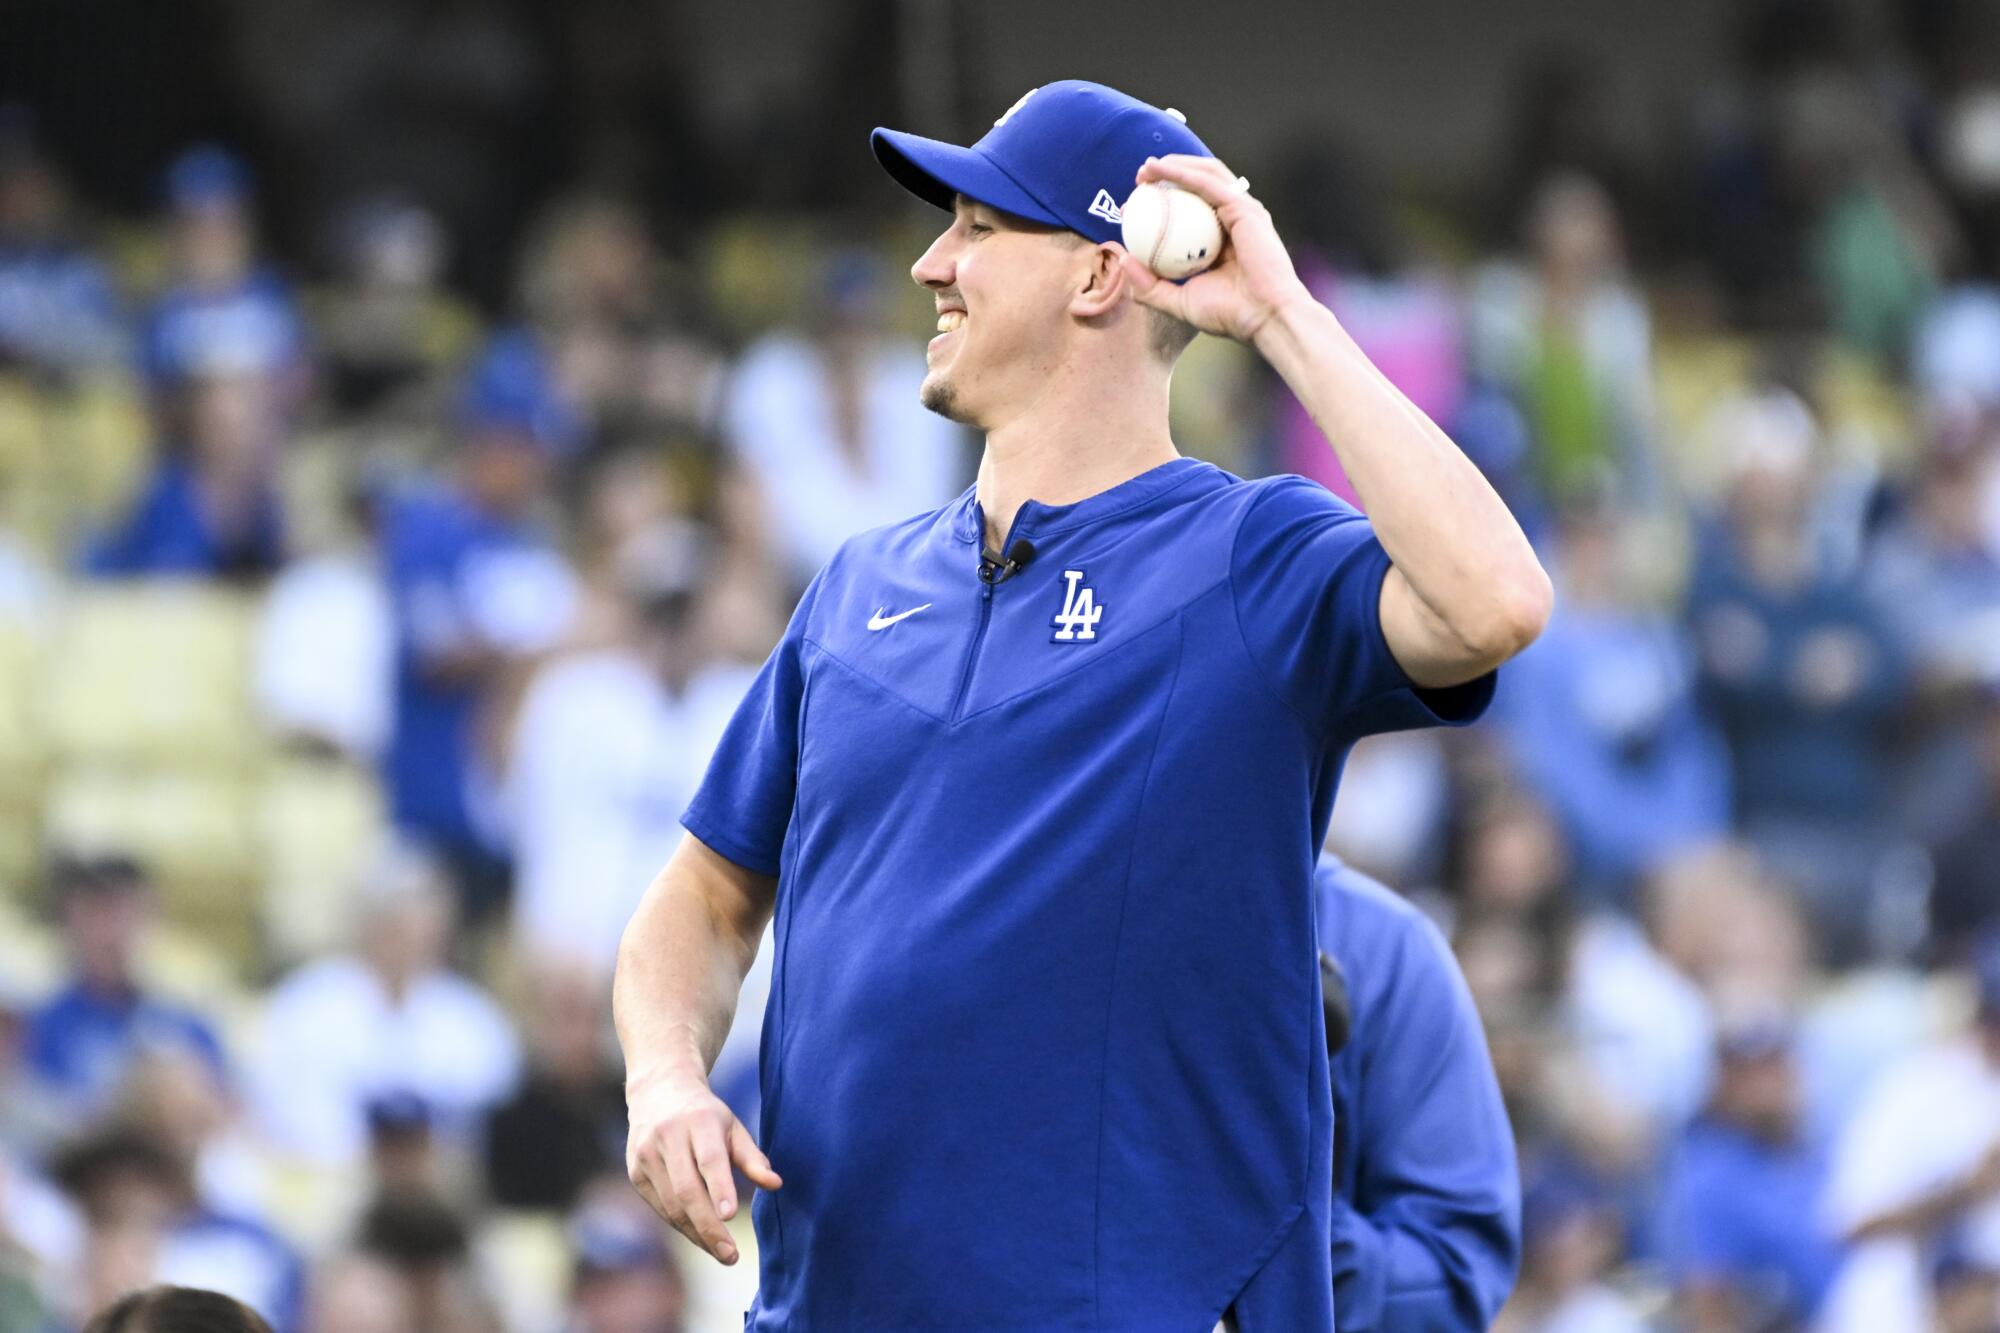 Walker Buehler throws out the first pitch left-handed before Game 2 of the NLDS against San Diego in October 2022.